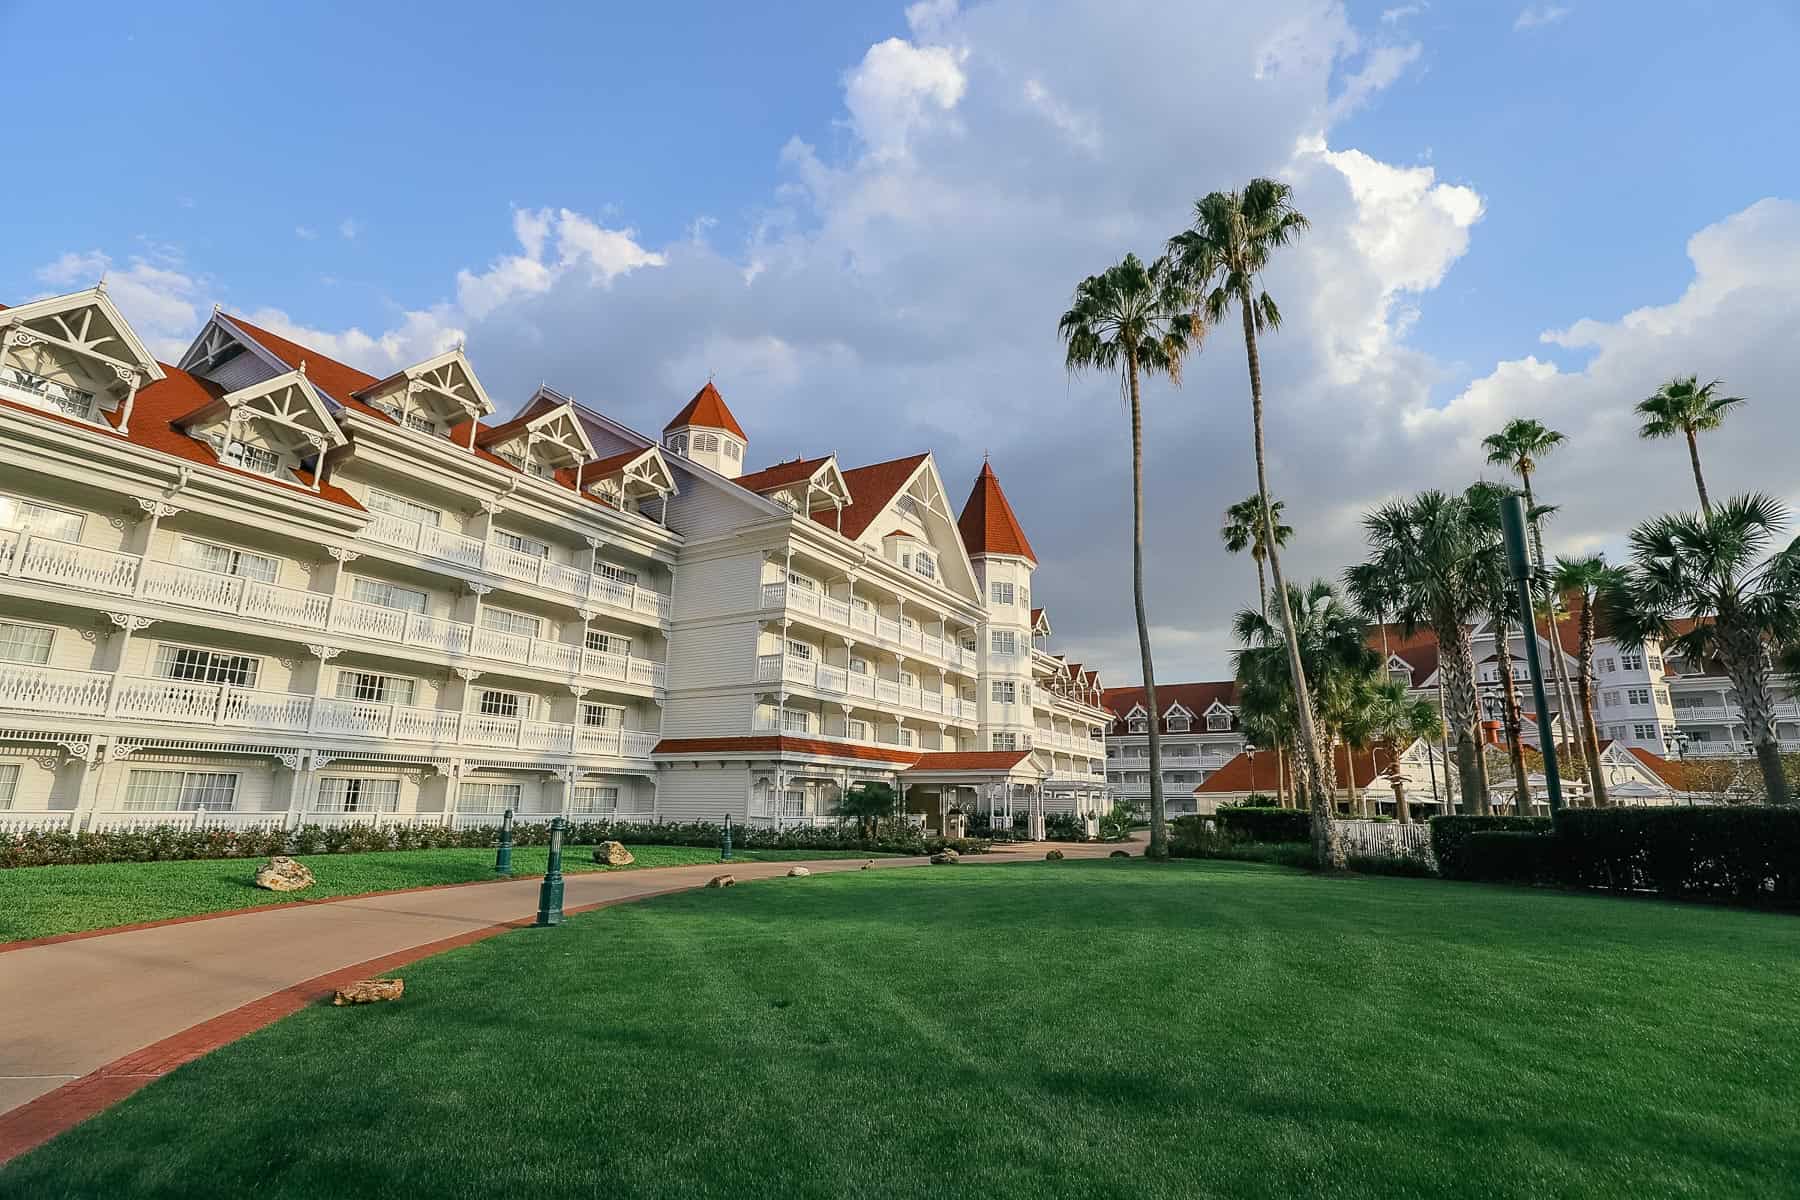 Lawn of Disney's Grand Floridian Resort and Spa